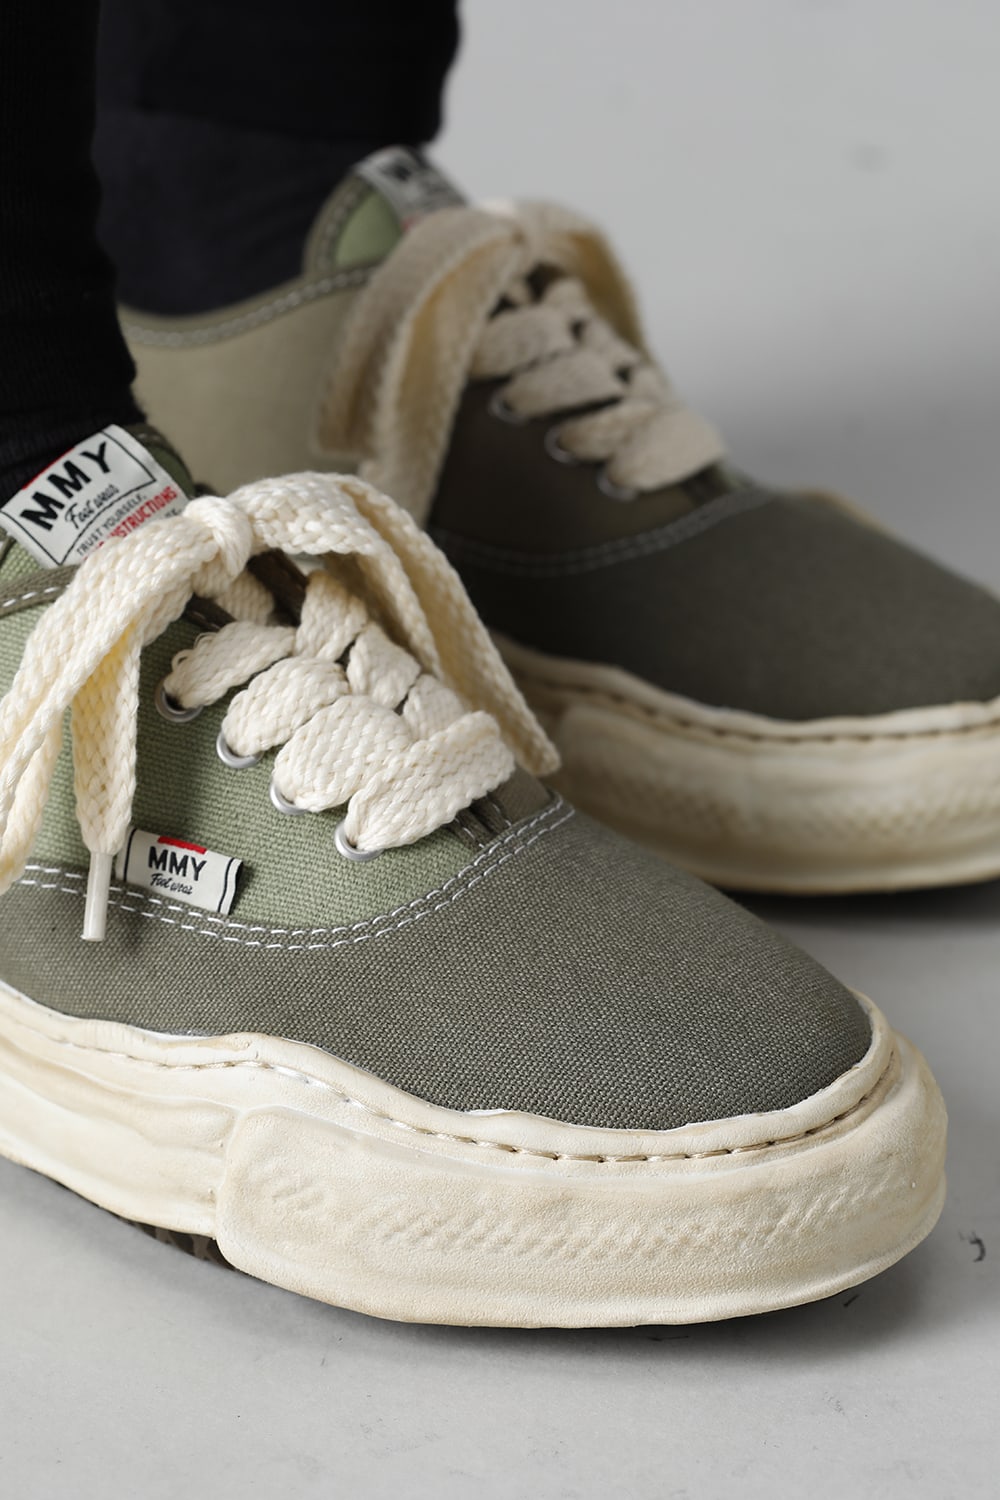 -BAKER- Over-dyed original sole canvas Low-Top sneakers Green